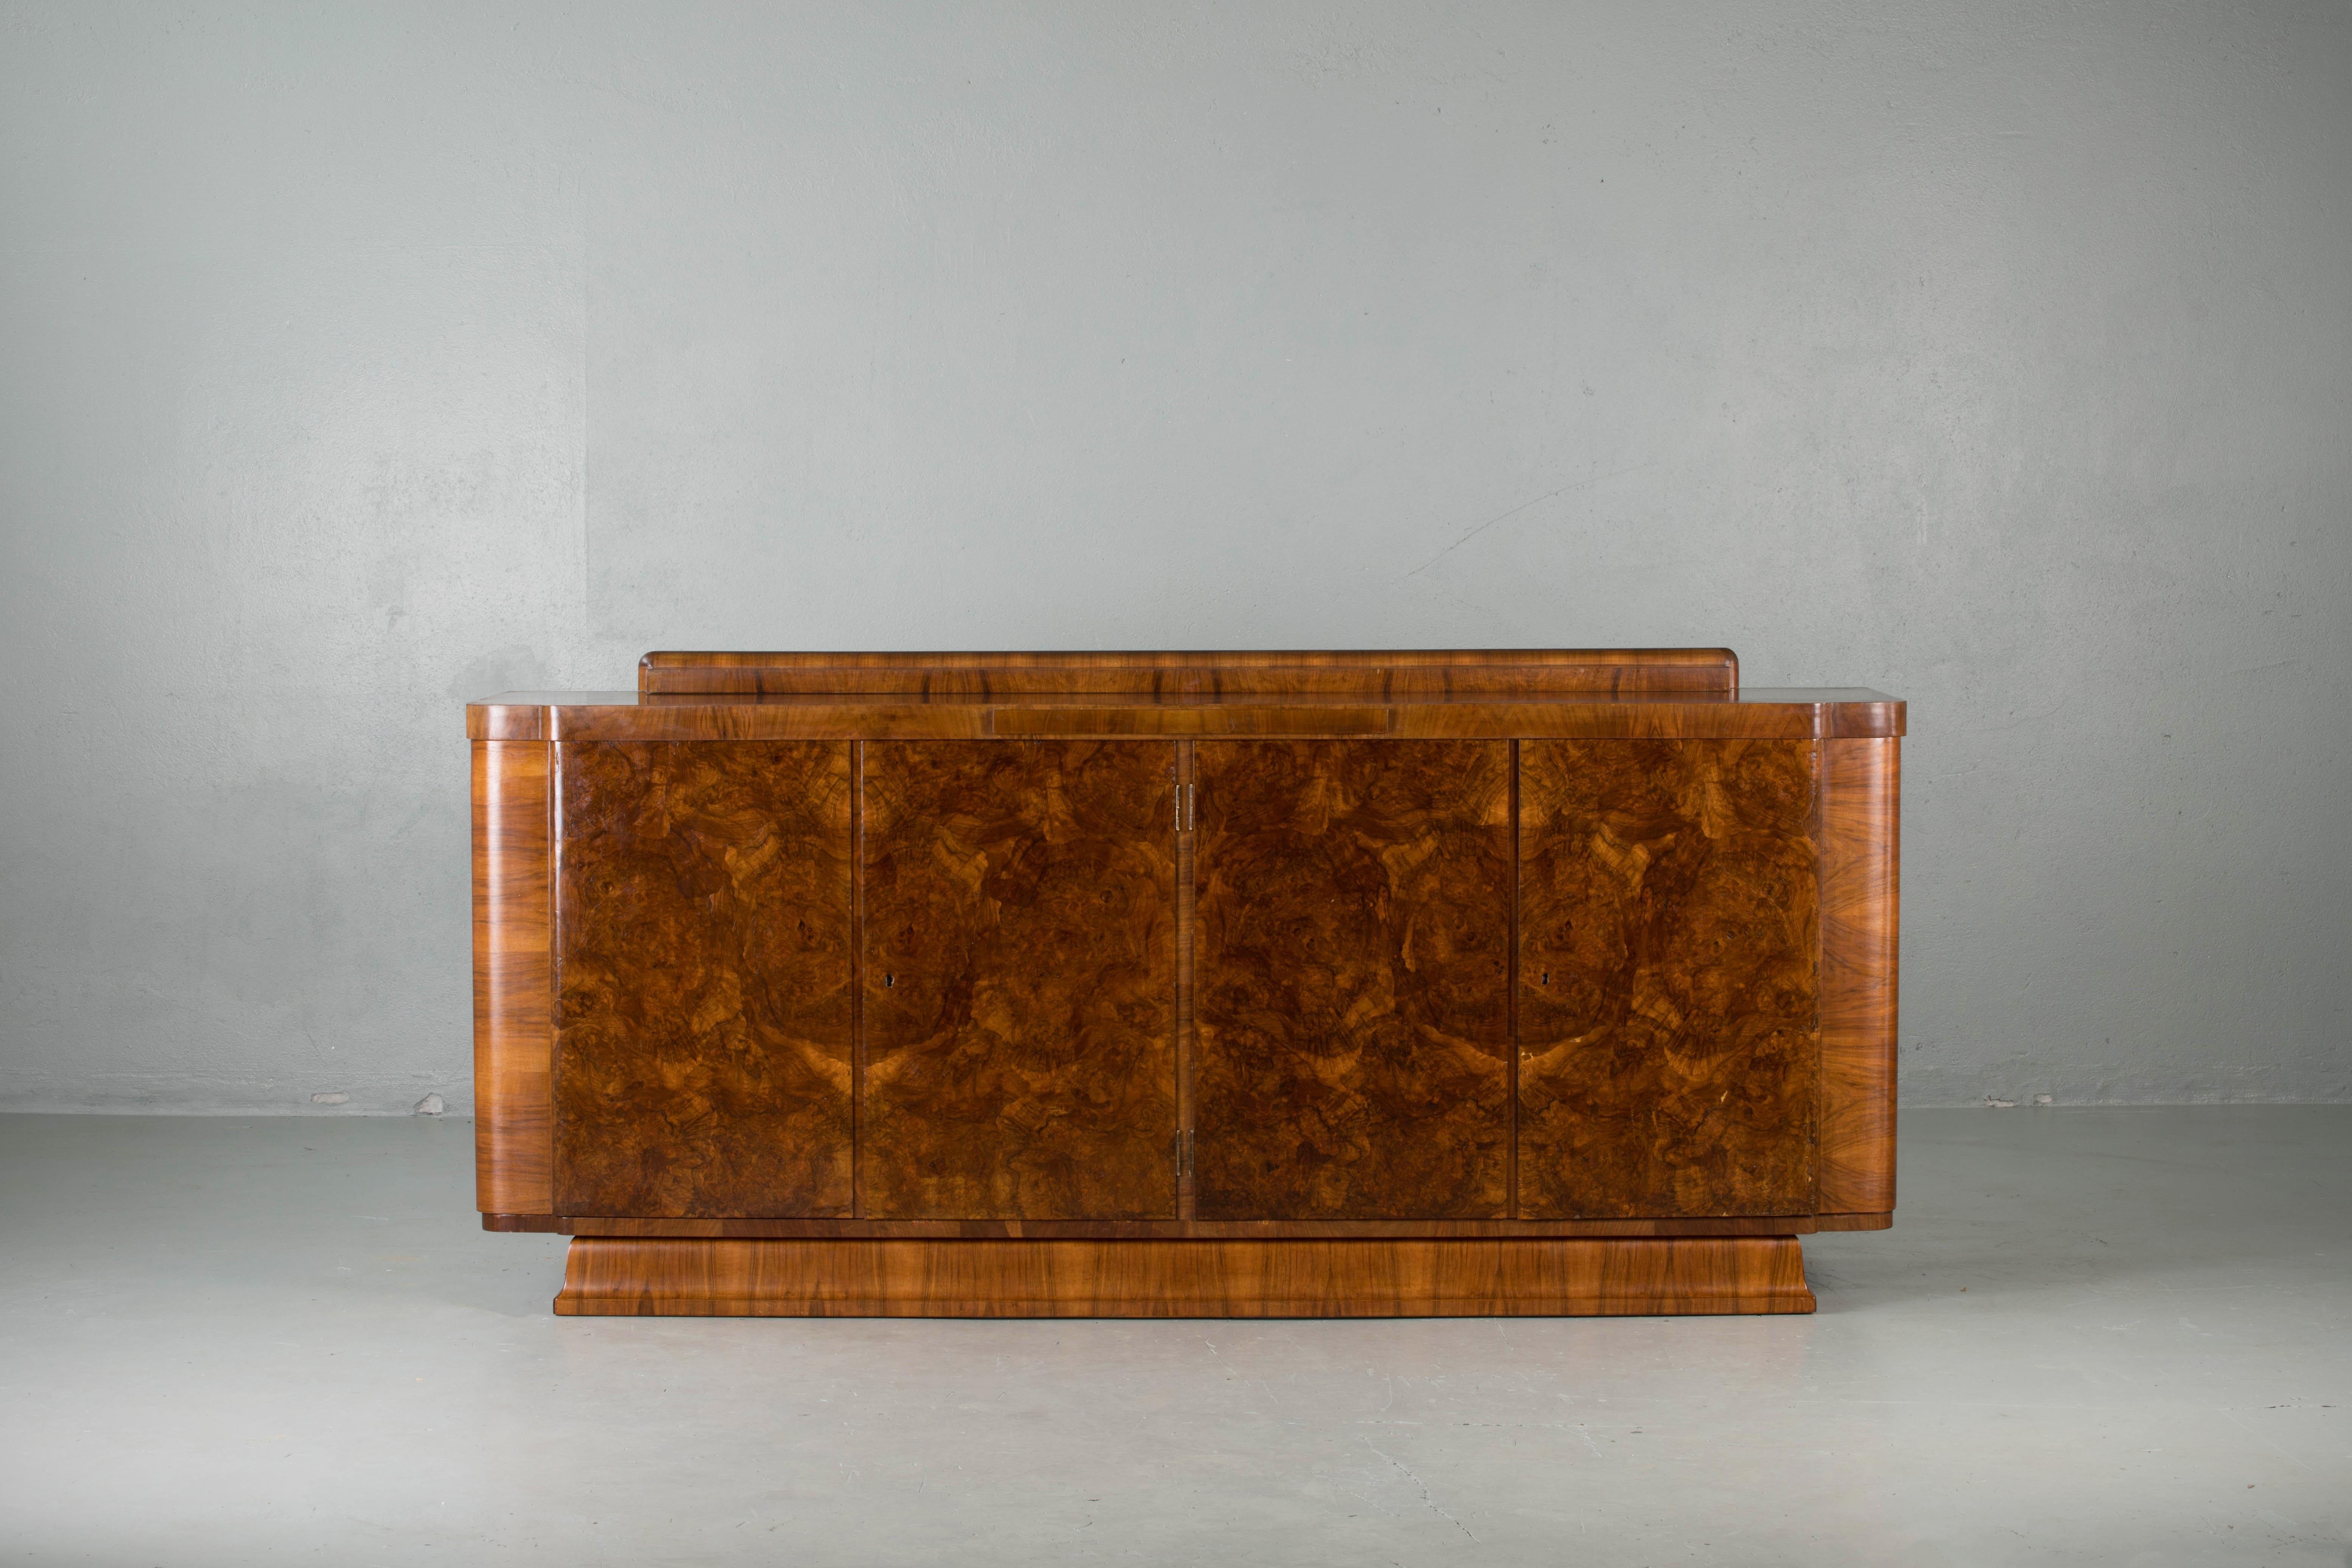 French Art Deco Classic burr walnut sideboard or buffet, circa 1930s.
This luxurious piece was originally made in Strasbourg (France) in the 1930s.
The sideboard features five inside drawers, a marble tablet and two shelves.
The curved lines of this